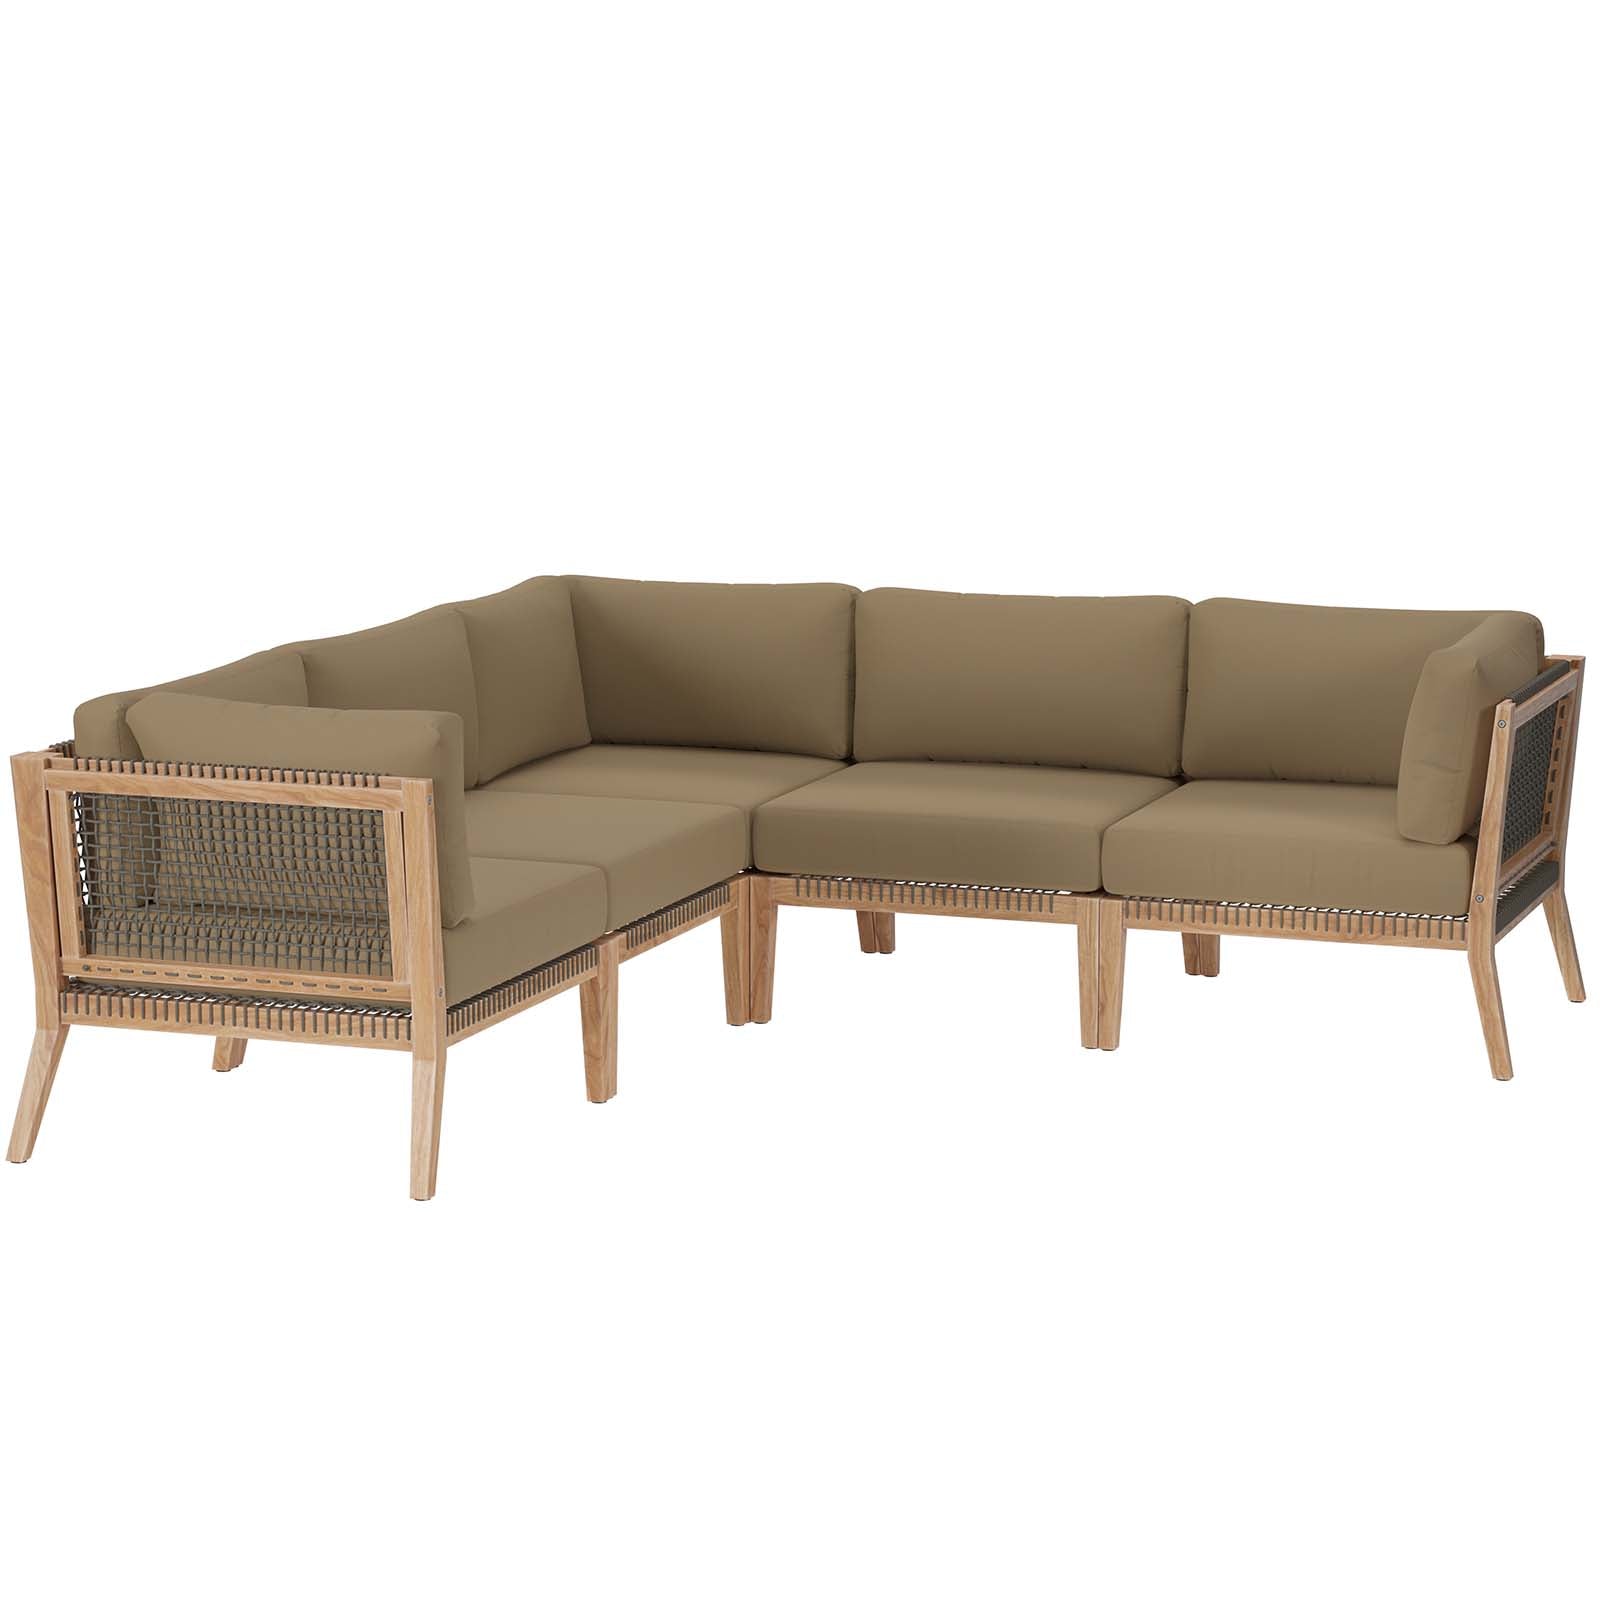 Modway Outdoor Sofas - Clearwater-Outdoor-Patio-Teak-Wood-5-Piece-Sectional-Sofa-Gray-Light-Brown